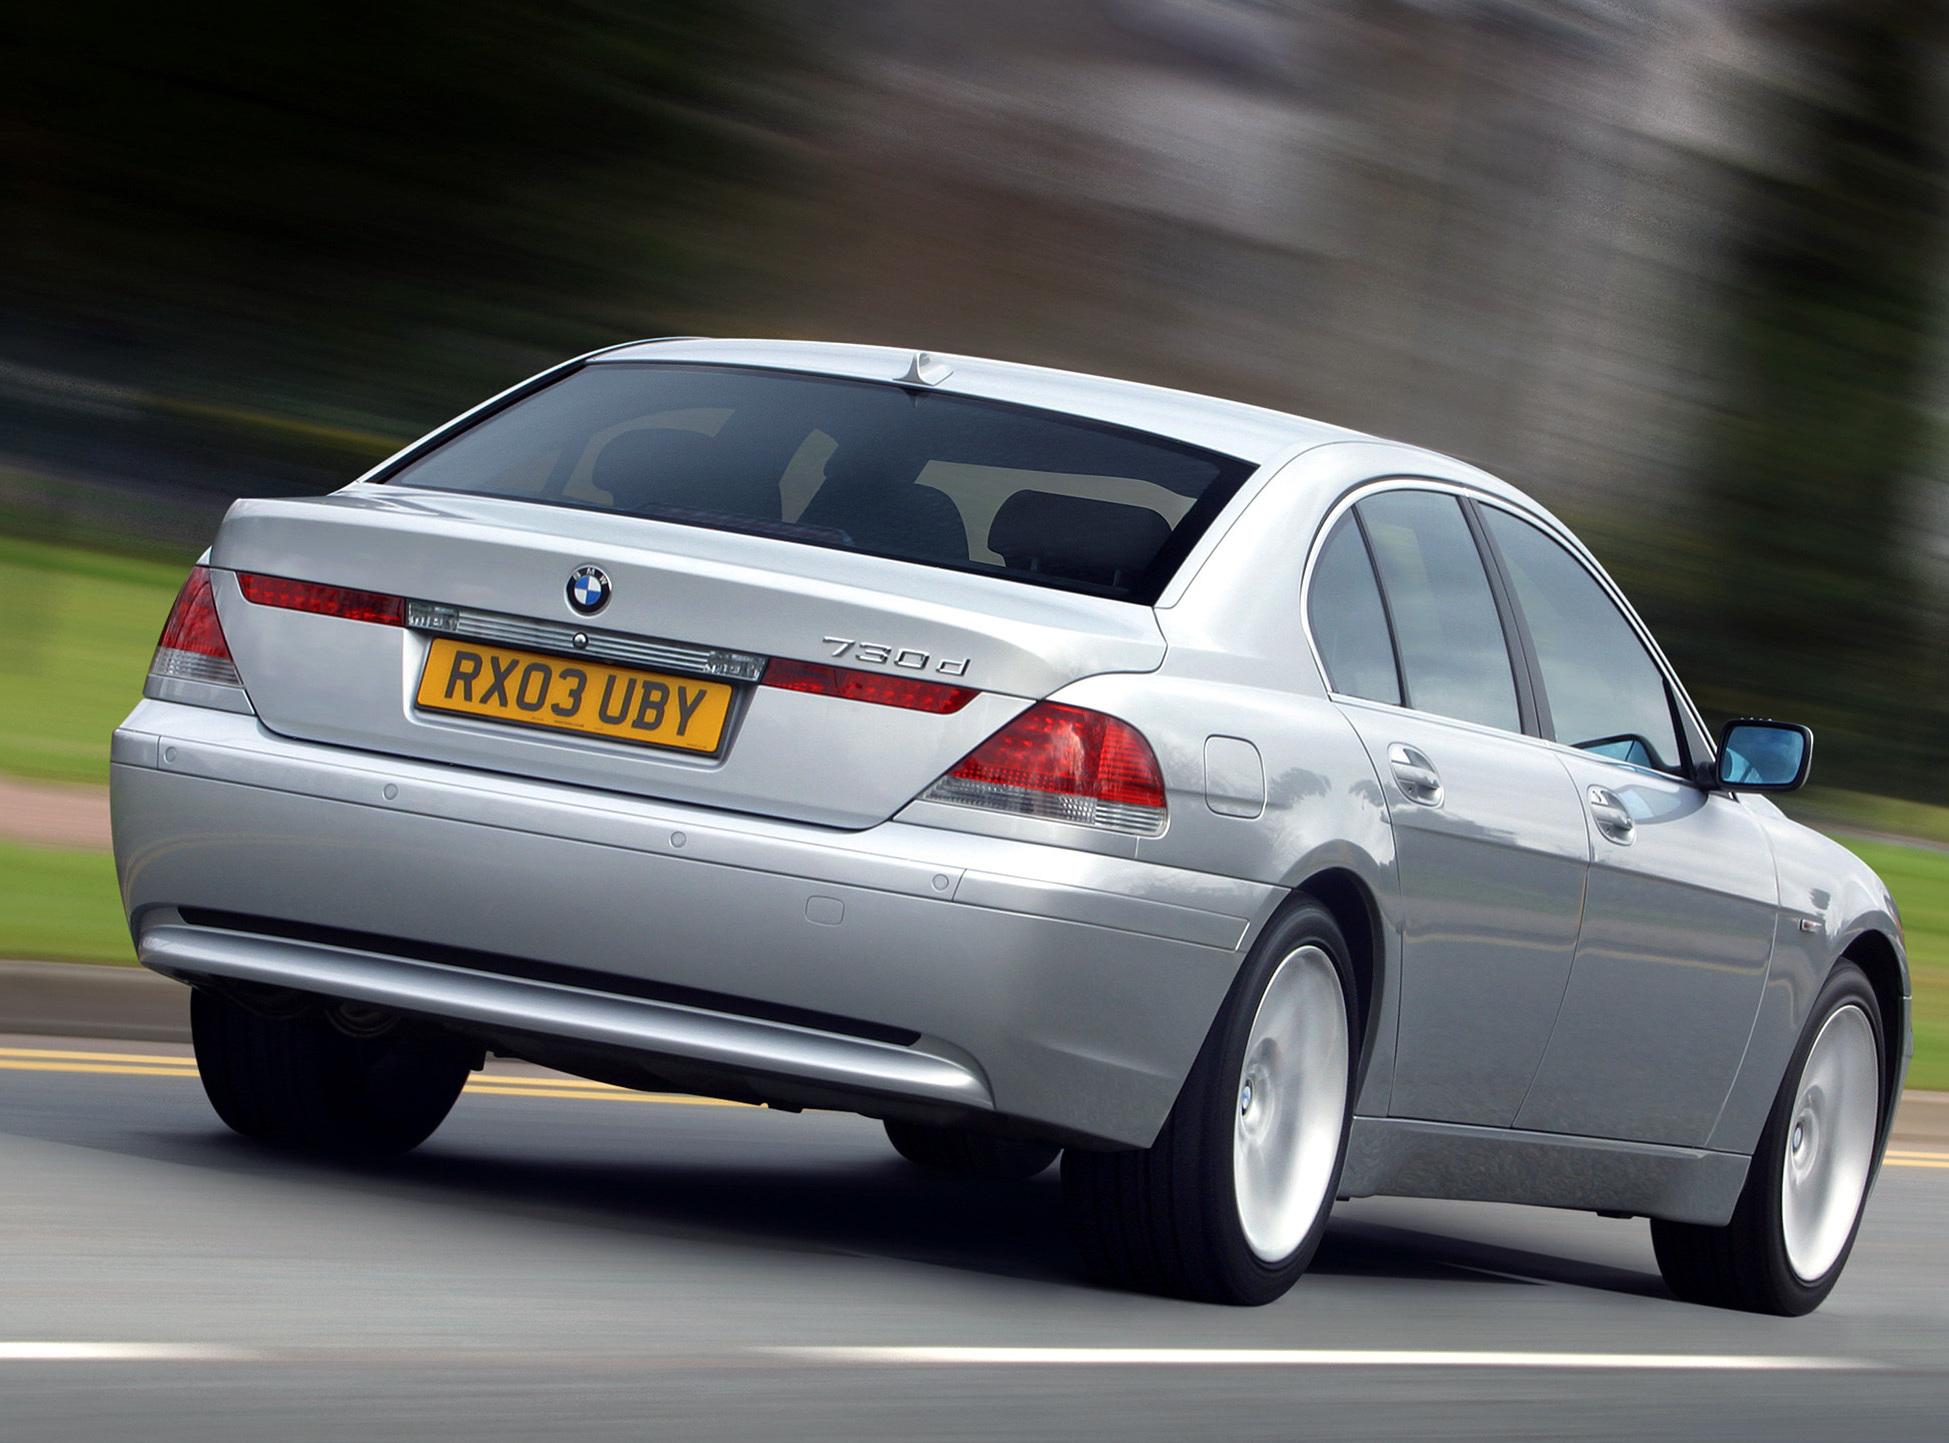 BMW 7-series 2003 model is now too cheap to ignore - Drive Safe and Fast